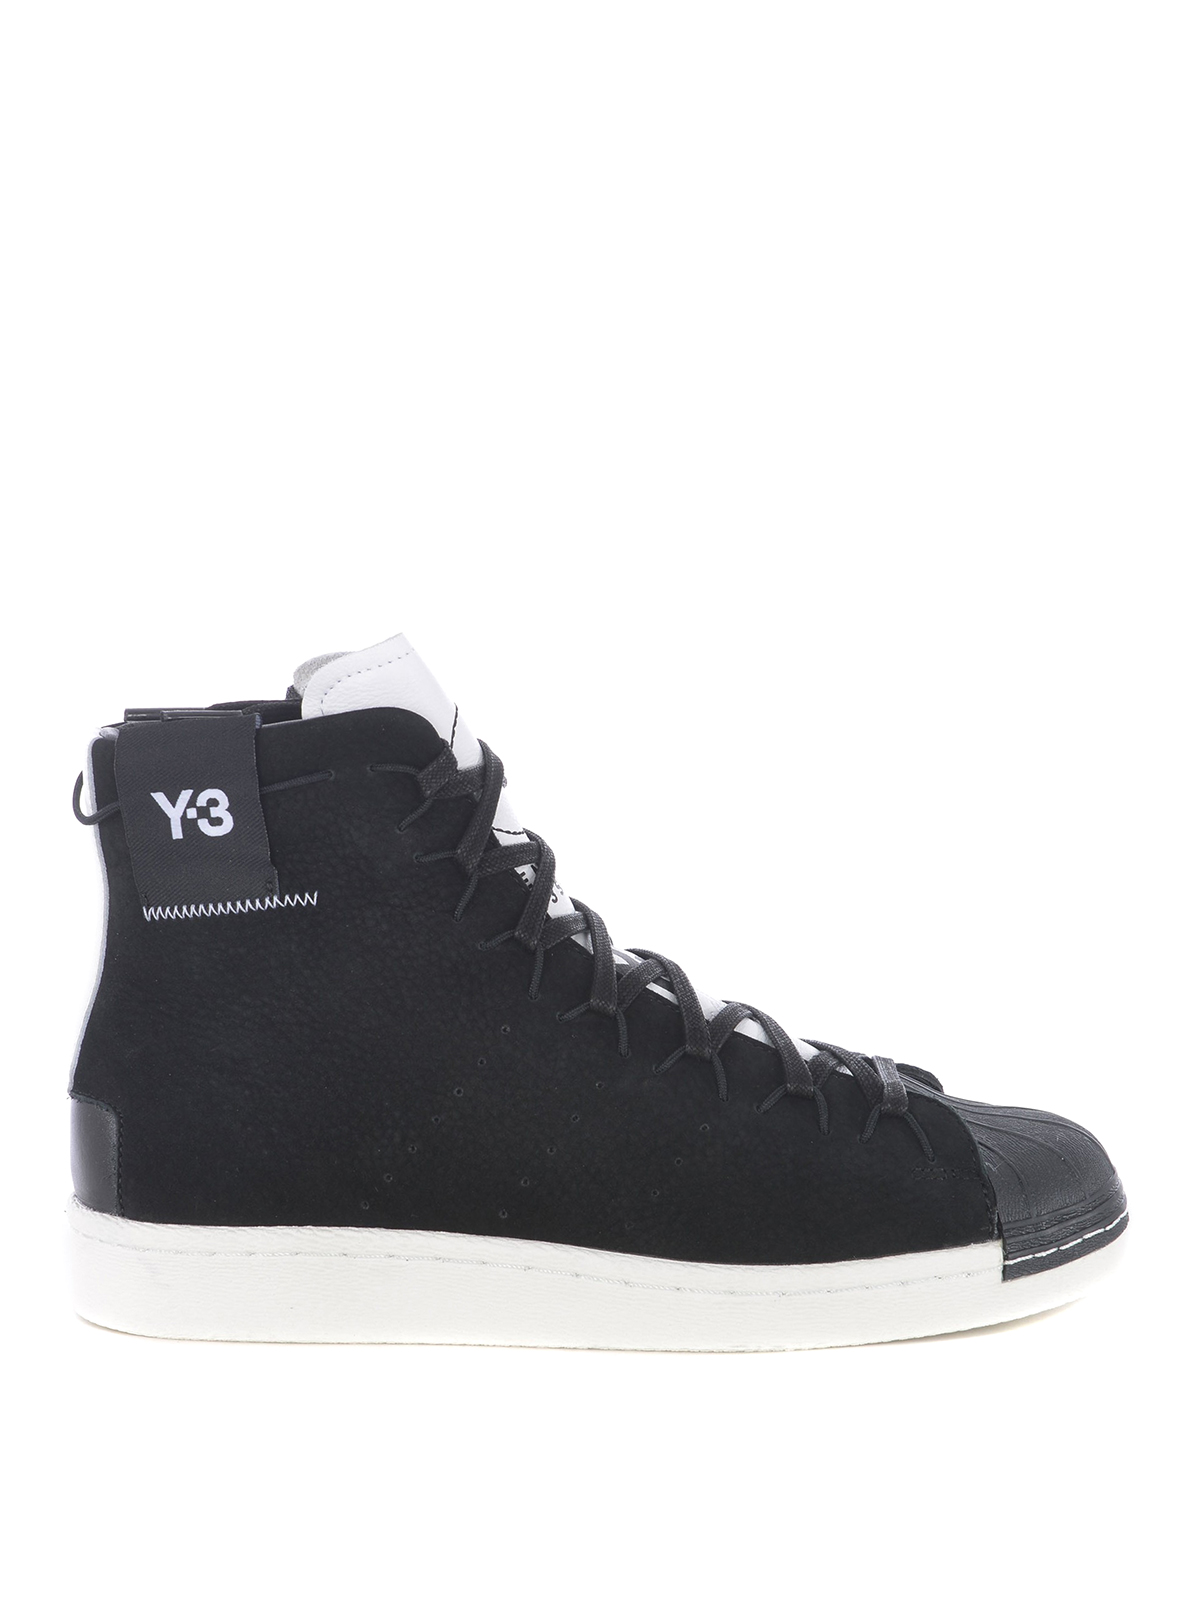 what are y3 trainers